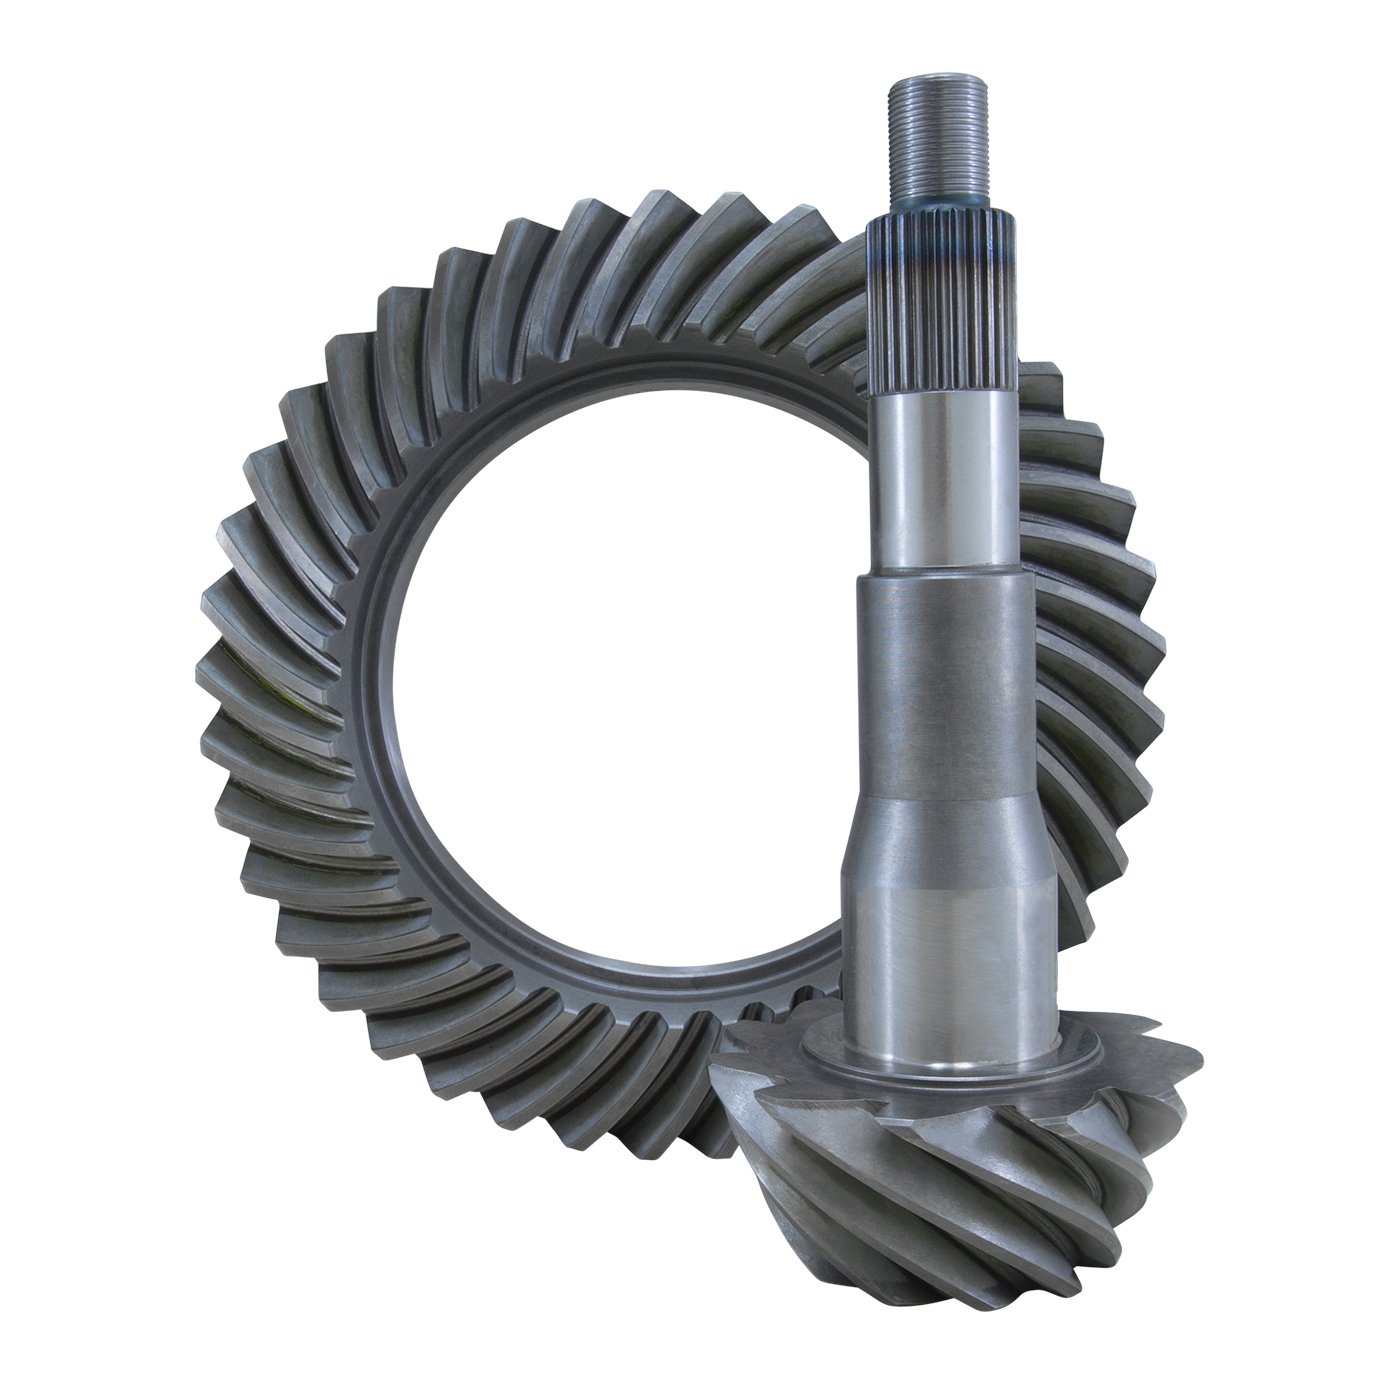 USA Standard 36103 Ring & Pinion Gear Set, For Ford 10.25 in., 3.55 Ratio